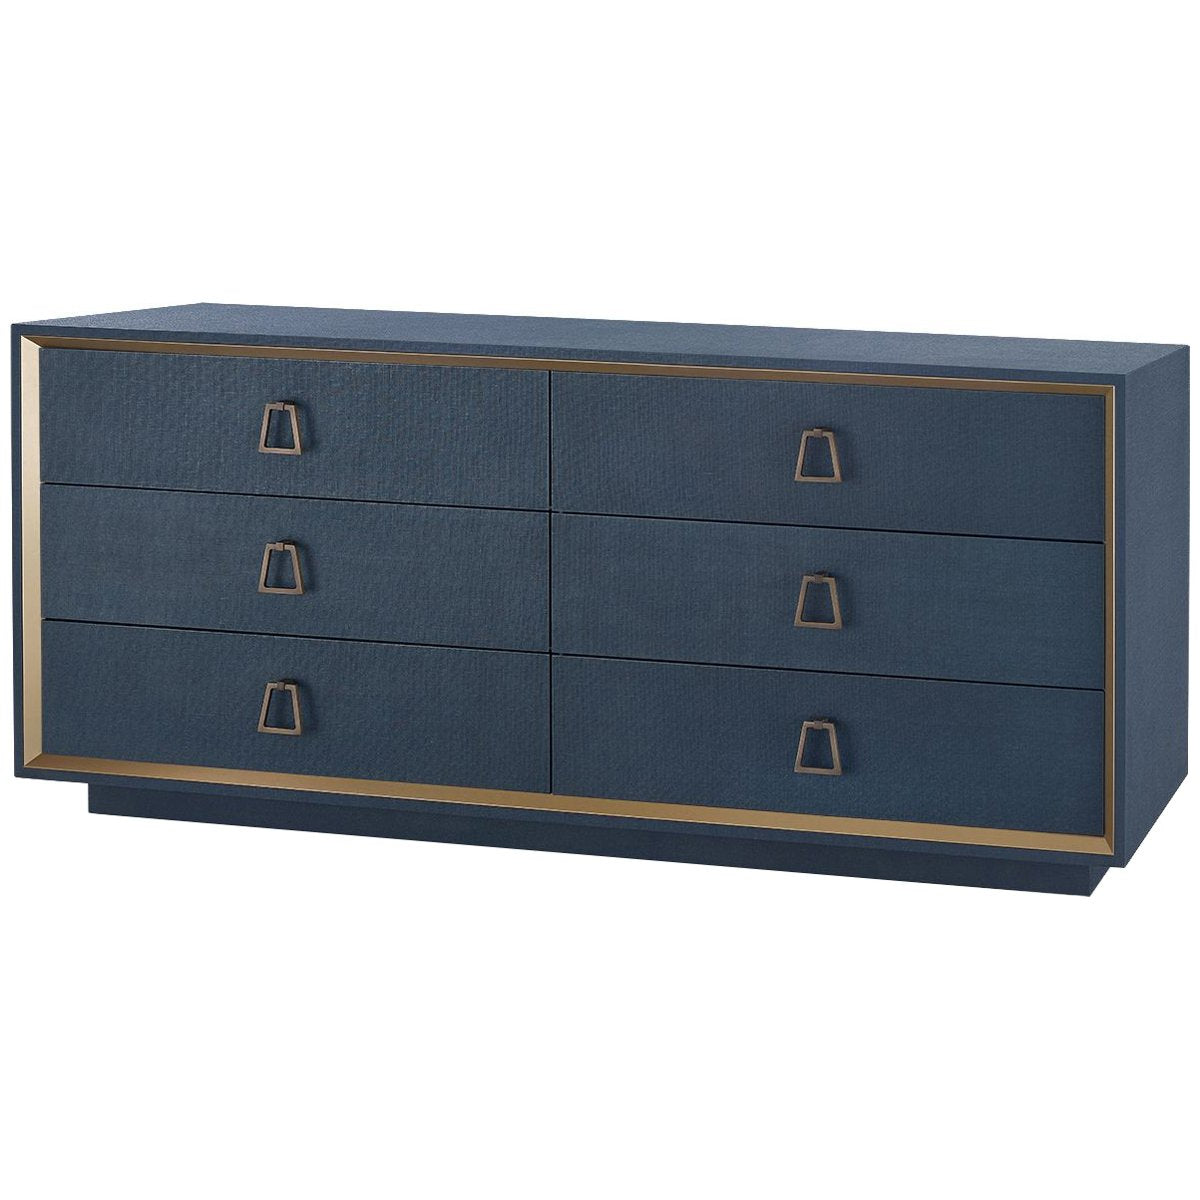 Villa & House Ansel Extra Large 6-Drawer Dresser with Kelley Pull